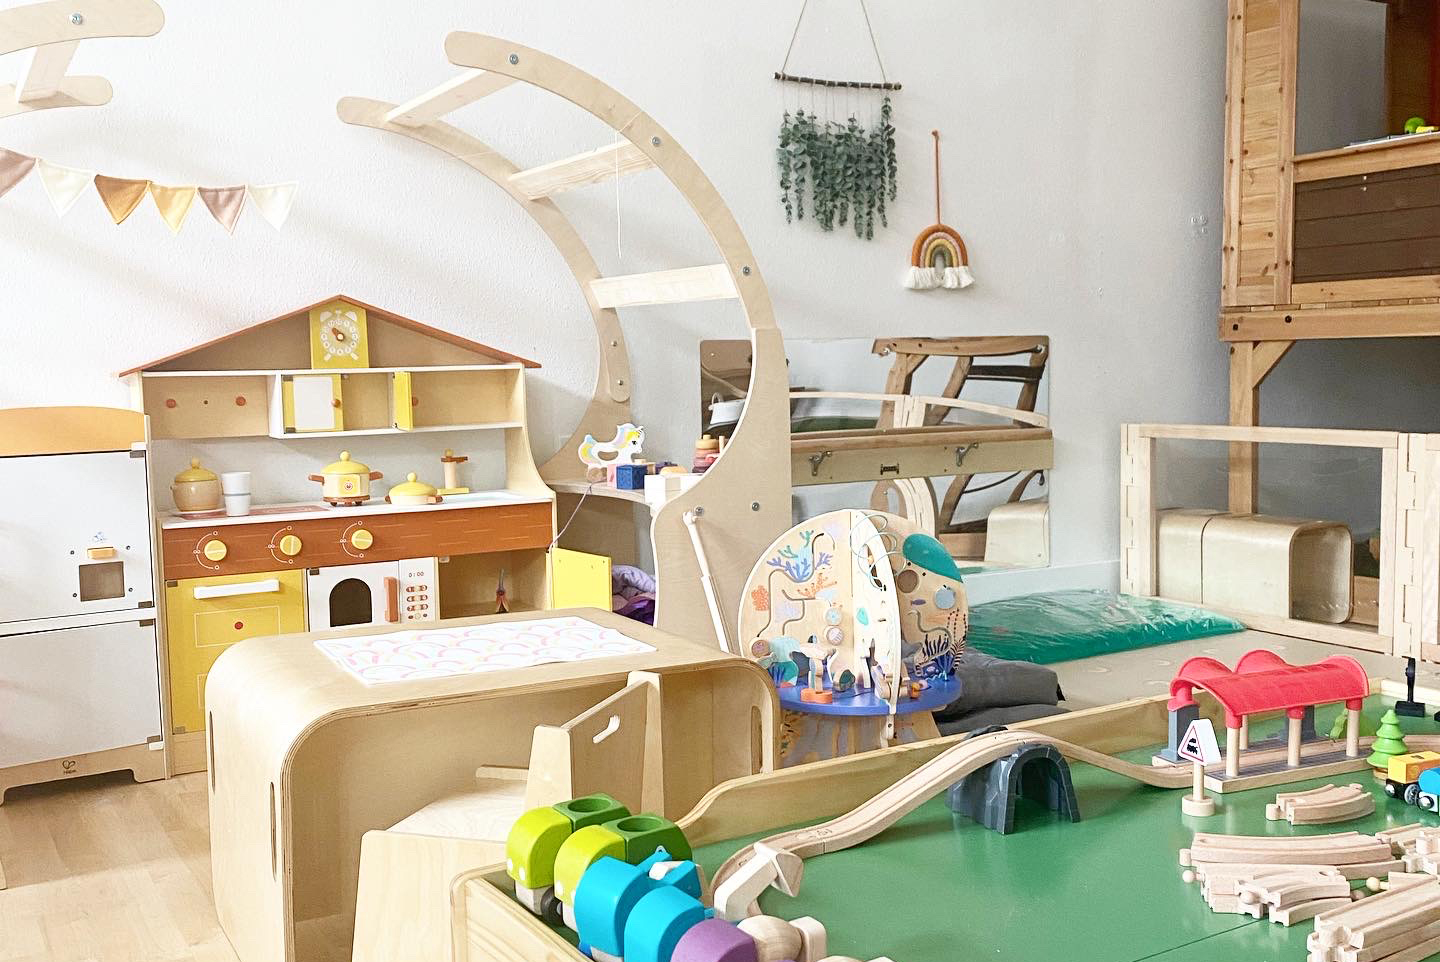 Playforest is an imaginative space for young children to explore.